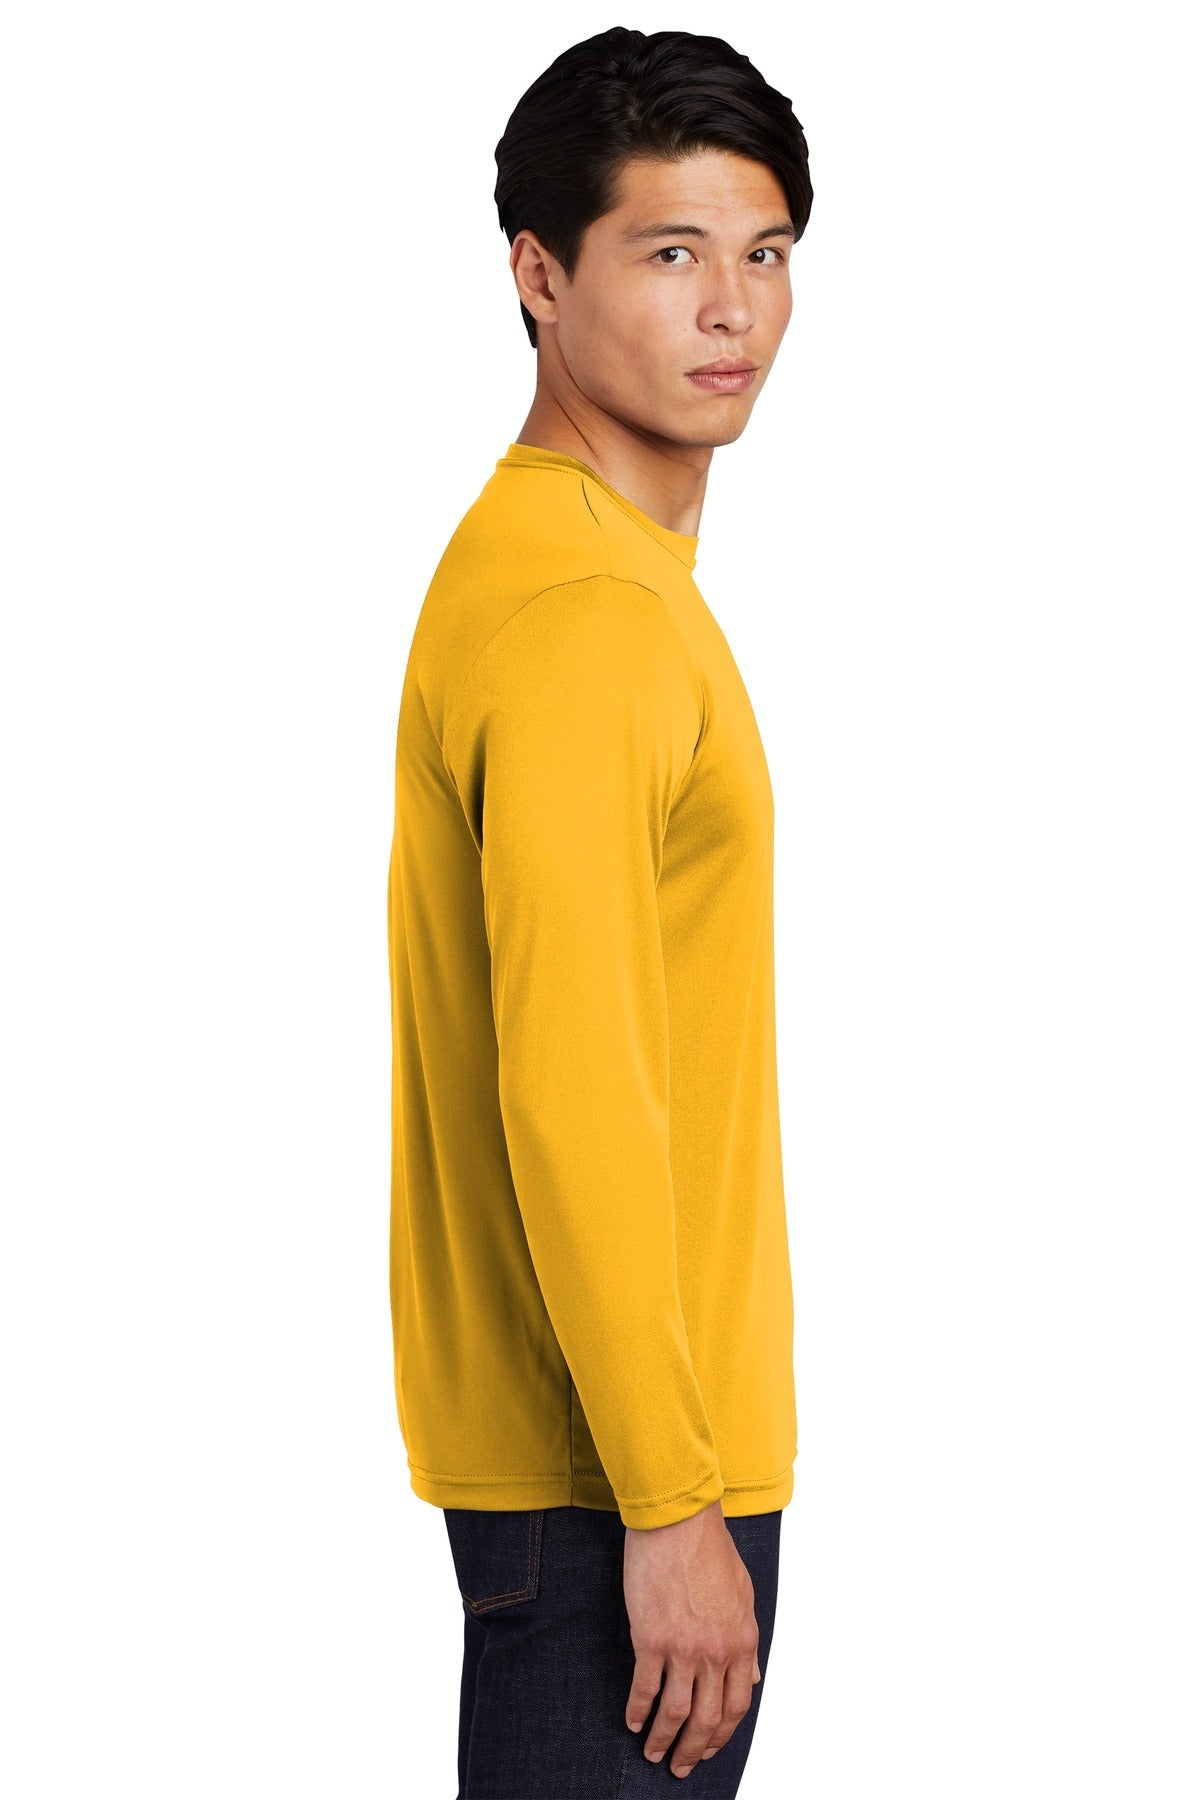 Sport-Tek® Long Sleeve PosiCharge® Competitor™ Tee. ST350LS [Gold] - DFW Impression